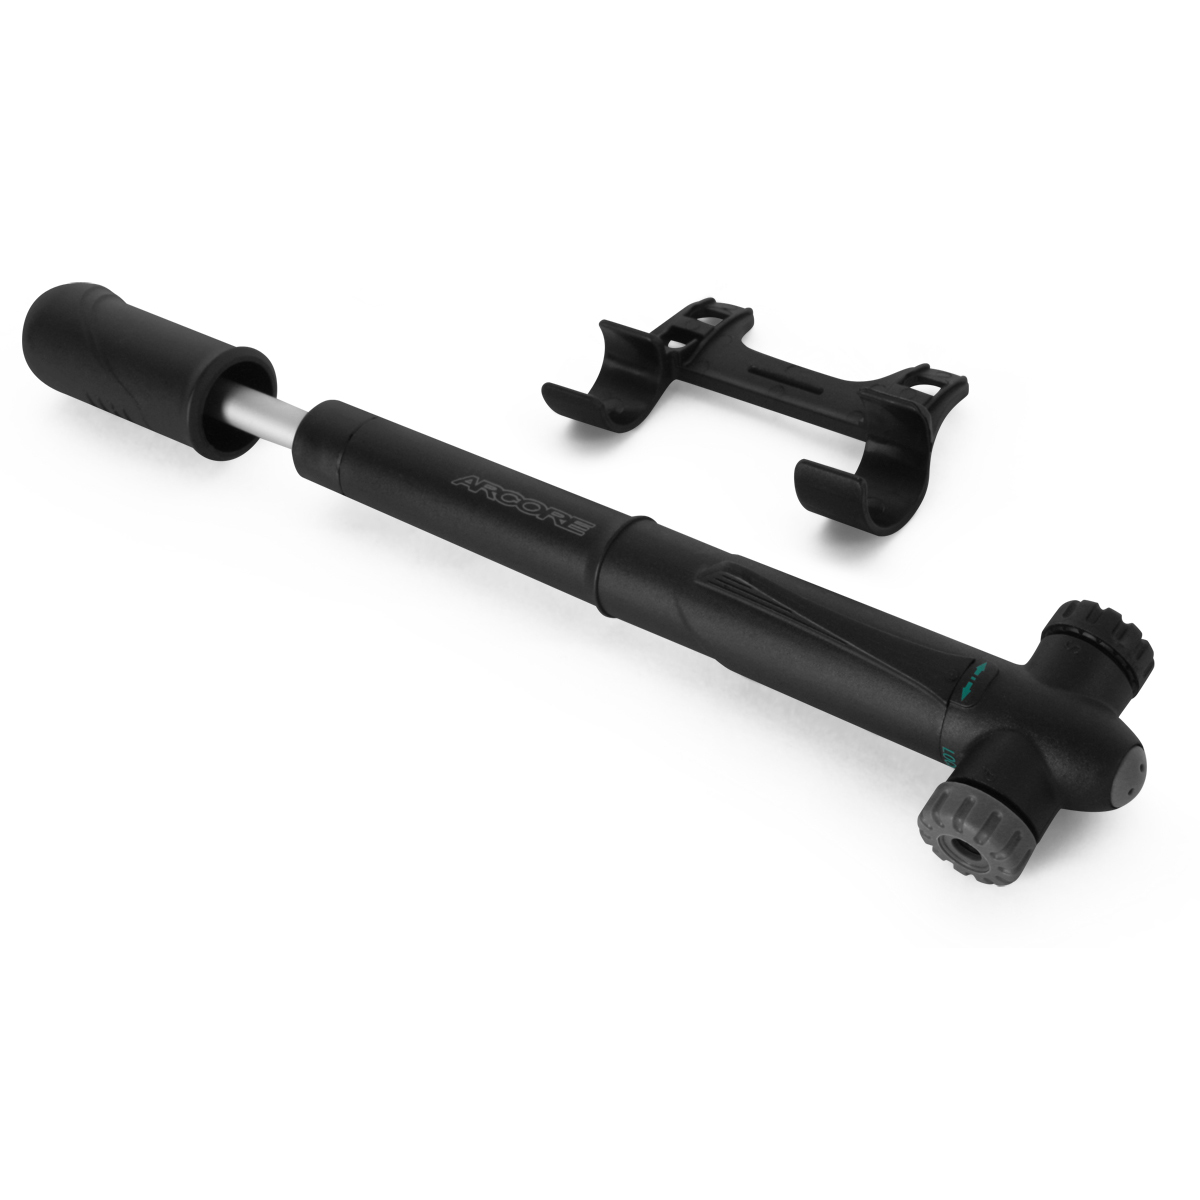 APS-3A - Telescopic bicycle pump with mounting under the bottle holder